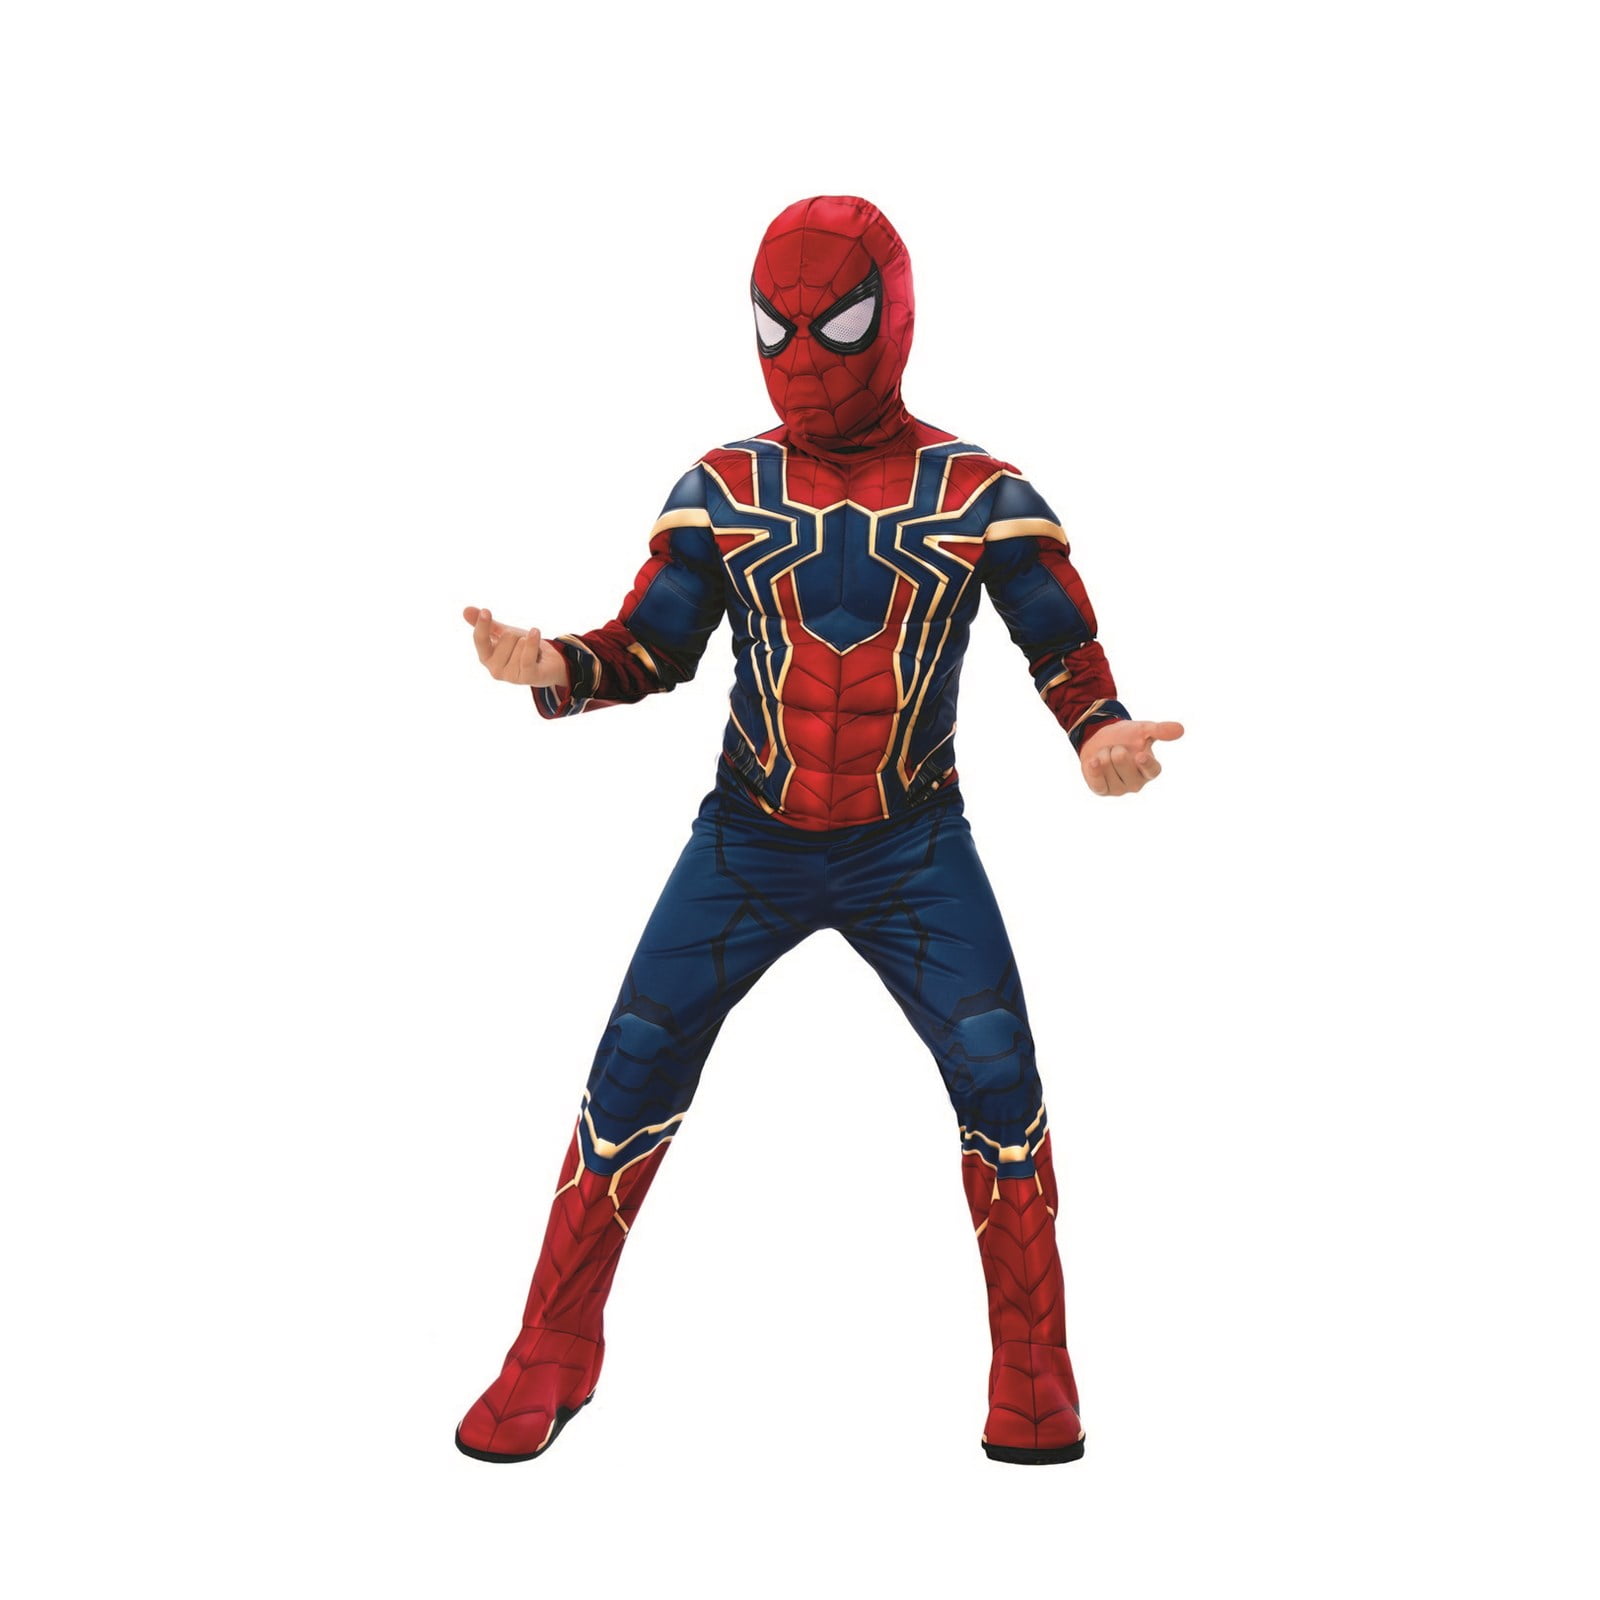 Rubie's Official Marvel Iron Spider-Man No Way Home Deluxe Childs Black Gold & Red Costume Kids Superhero Fancy Dress